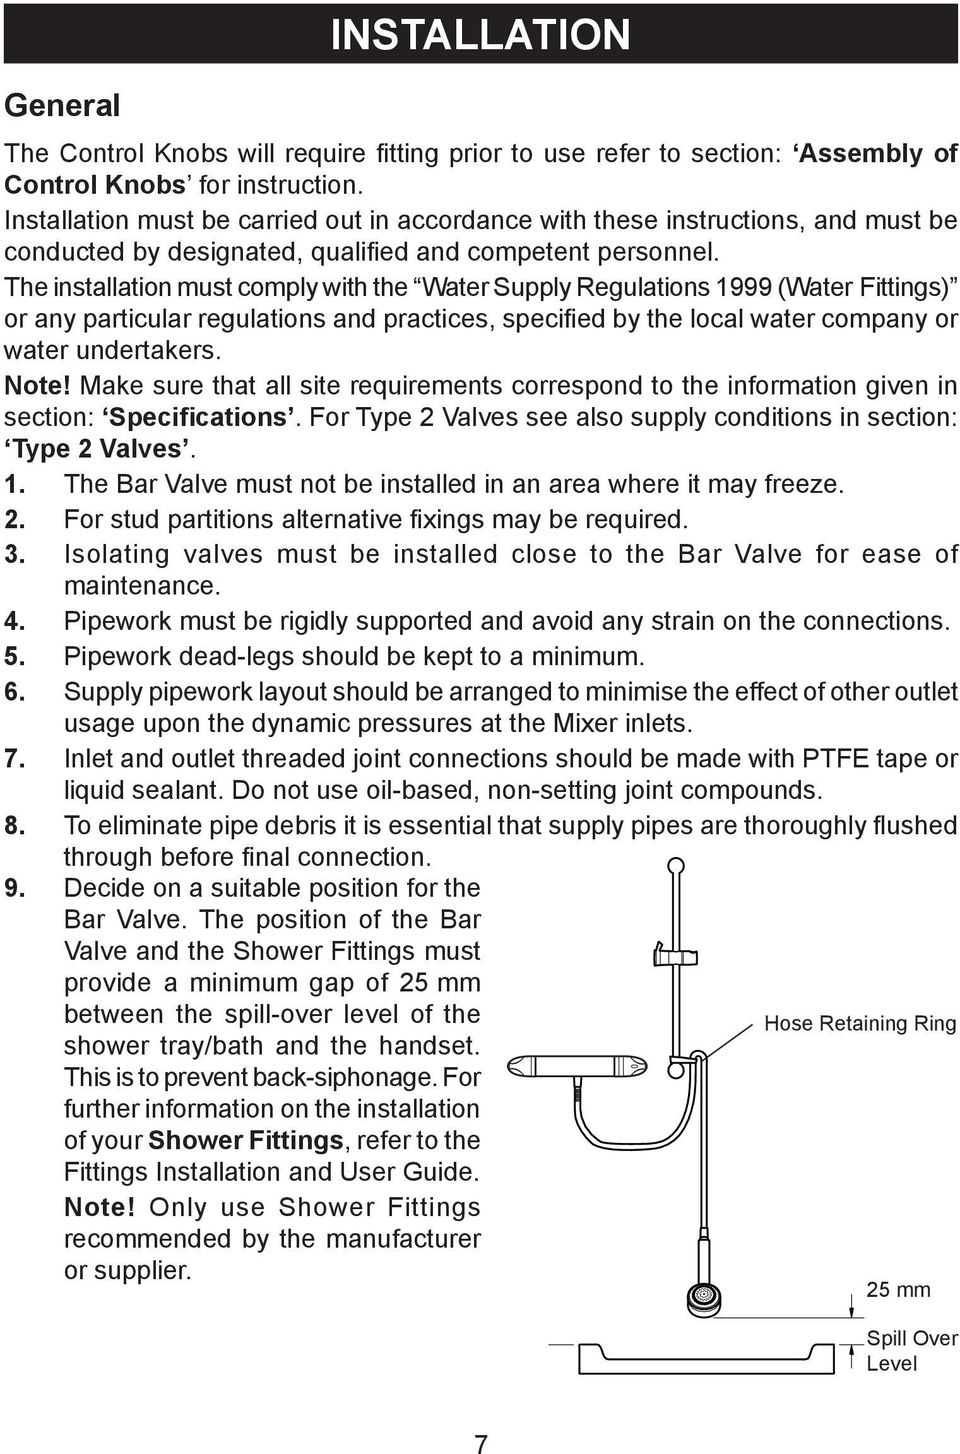 The installation must comply with the Water Supply Regulations 1999 (Water Fittings) or any particular regulations and practices, specified by the local water company or water undertakers. Note!